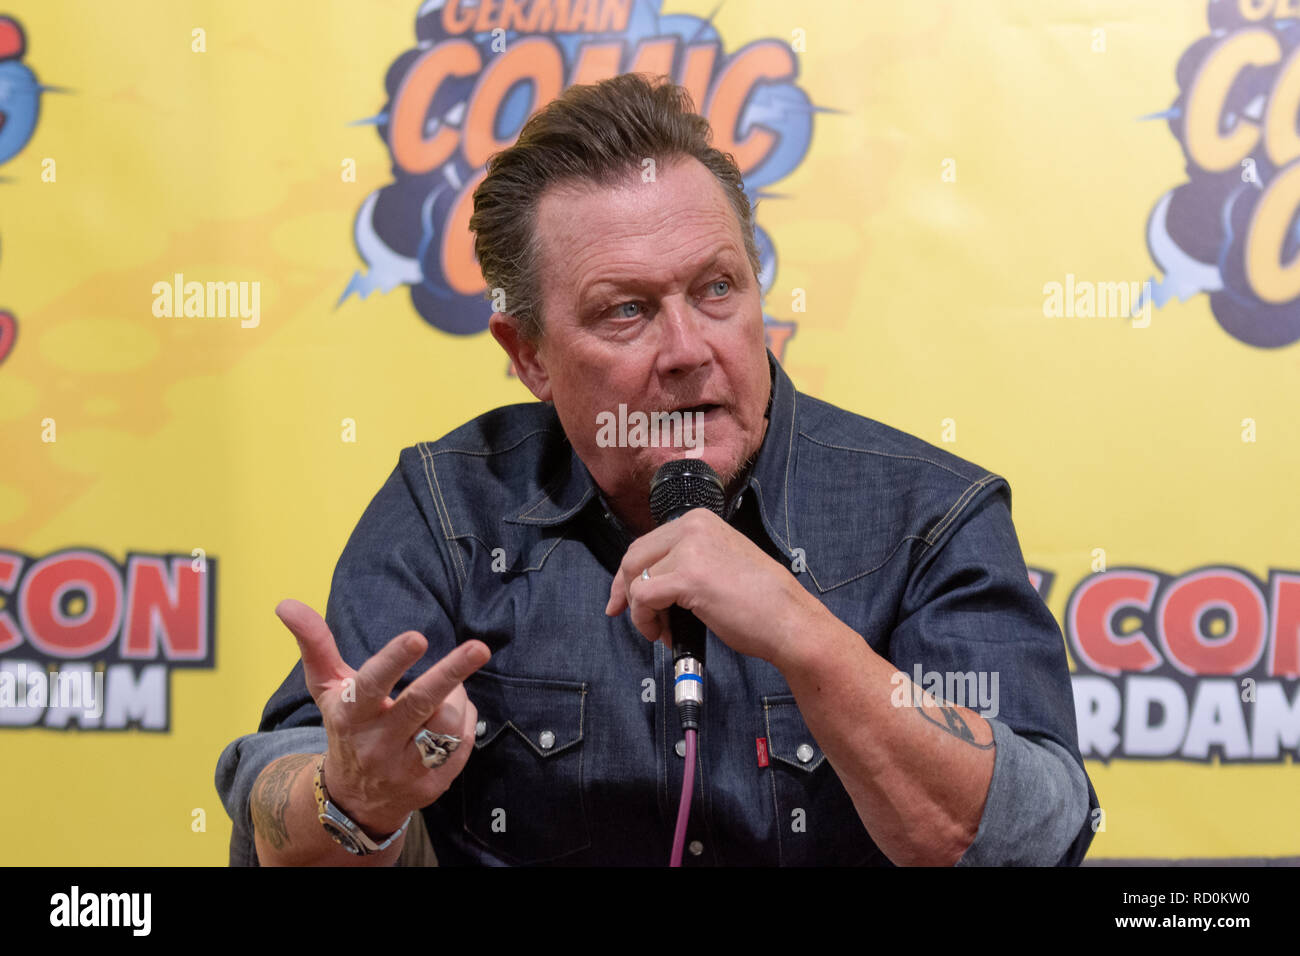 FRANKFURT, GERMANY - MAY 6th 2018: Robert Patrick (*1958, actor, The X-Files, Terminator 2) at German Comic Con Frankfurt, a two day fan convention Stock Photo